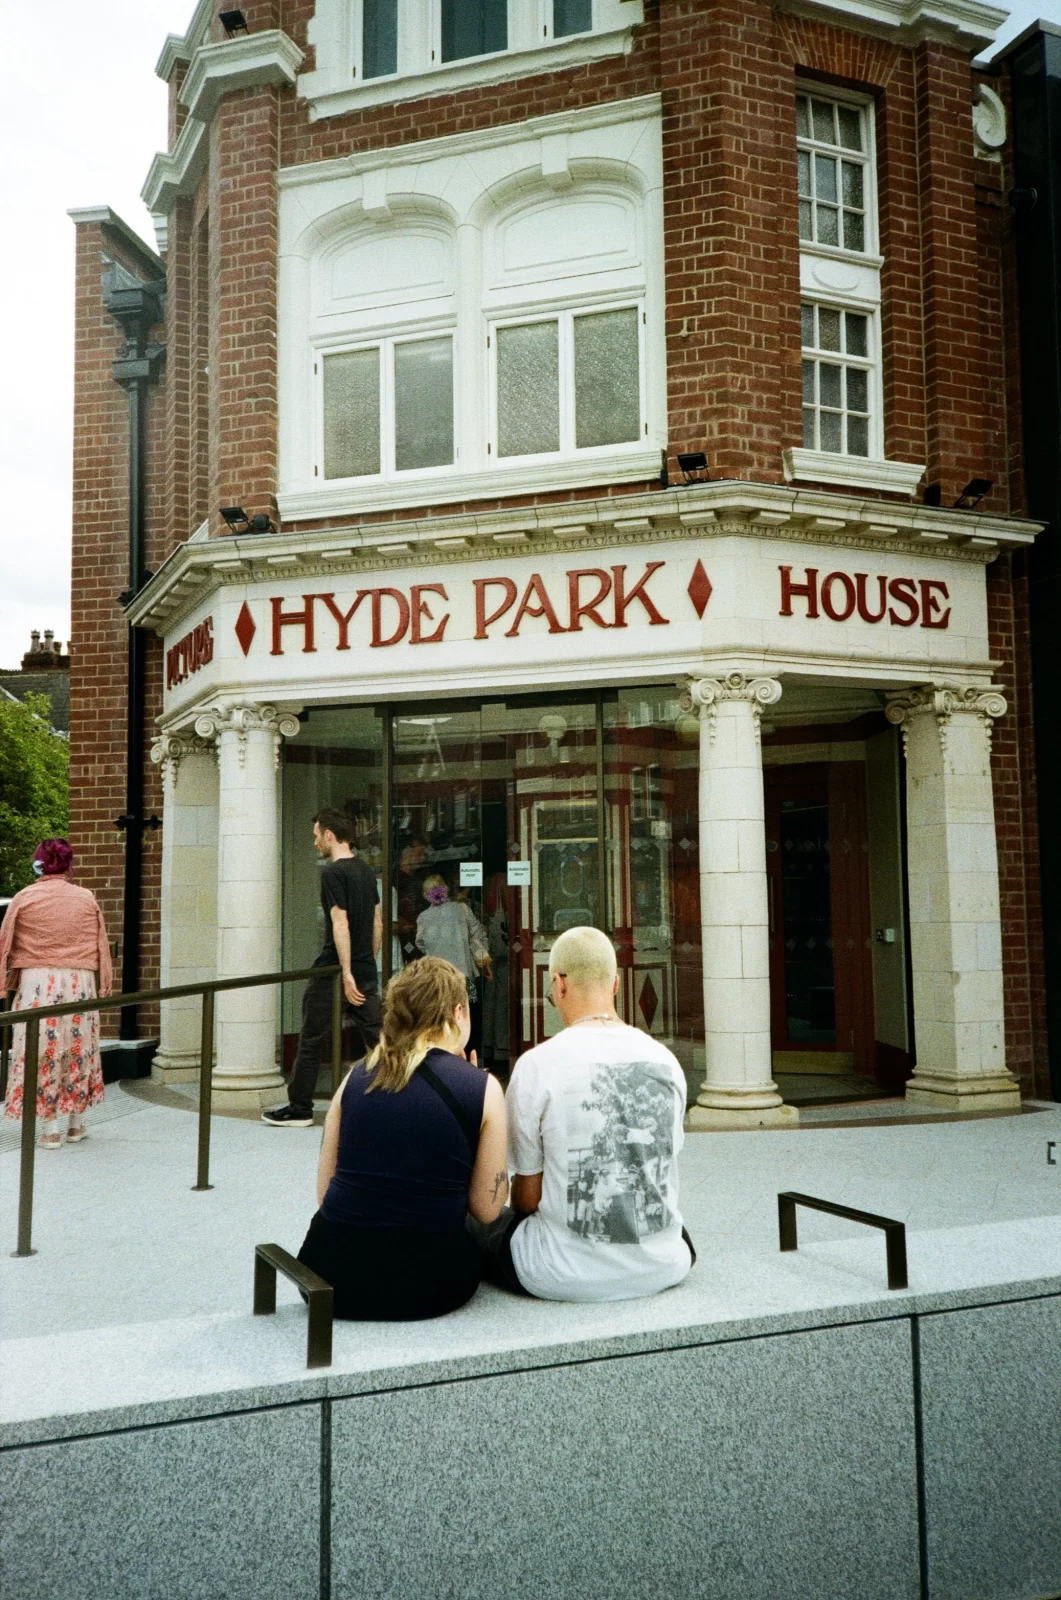 outside of cinema with Hyde Park on a sign.